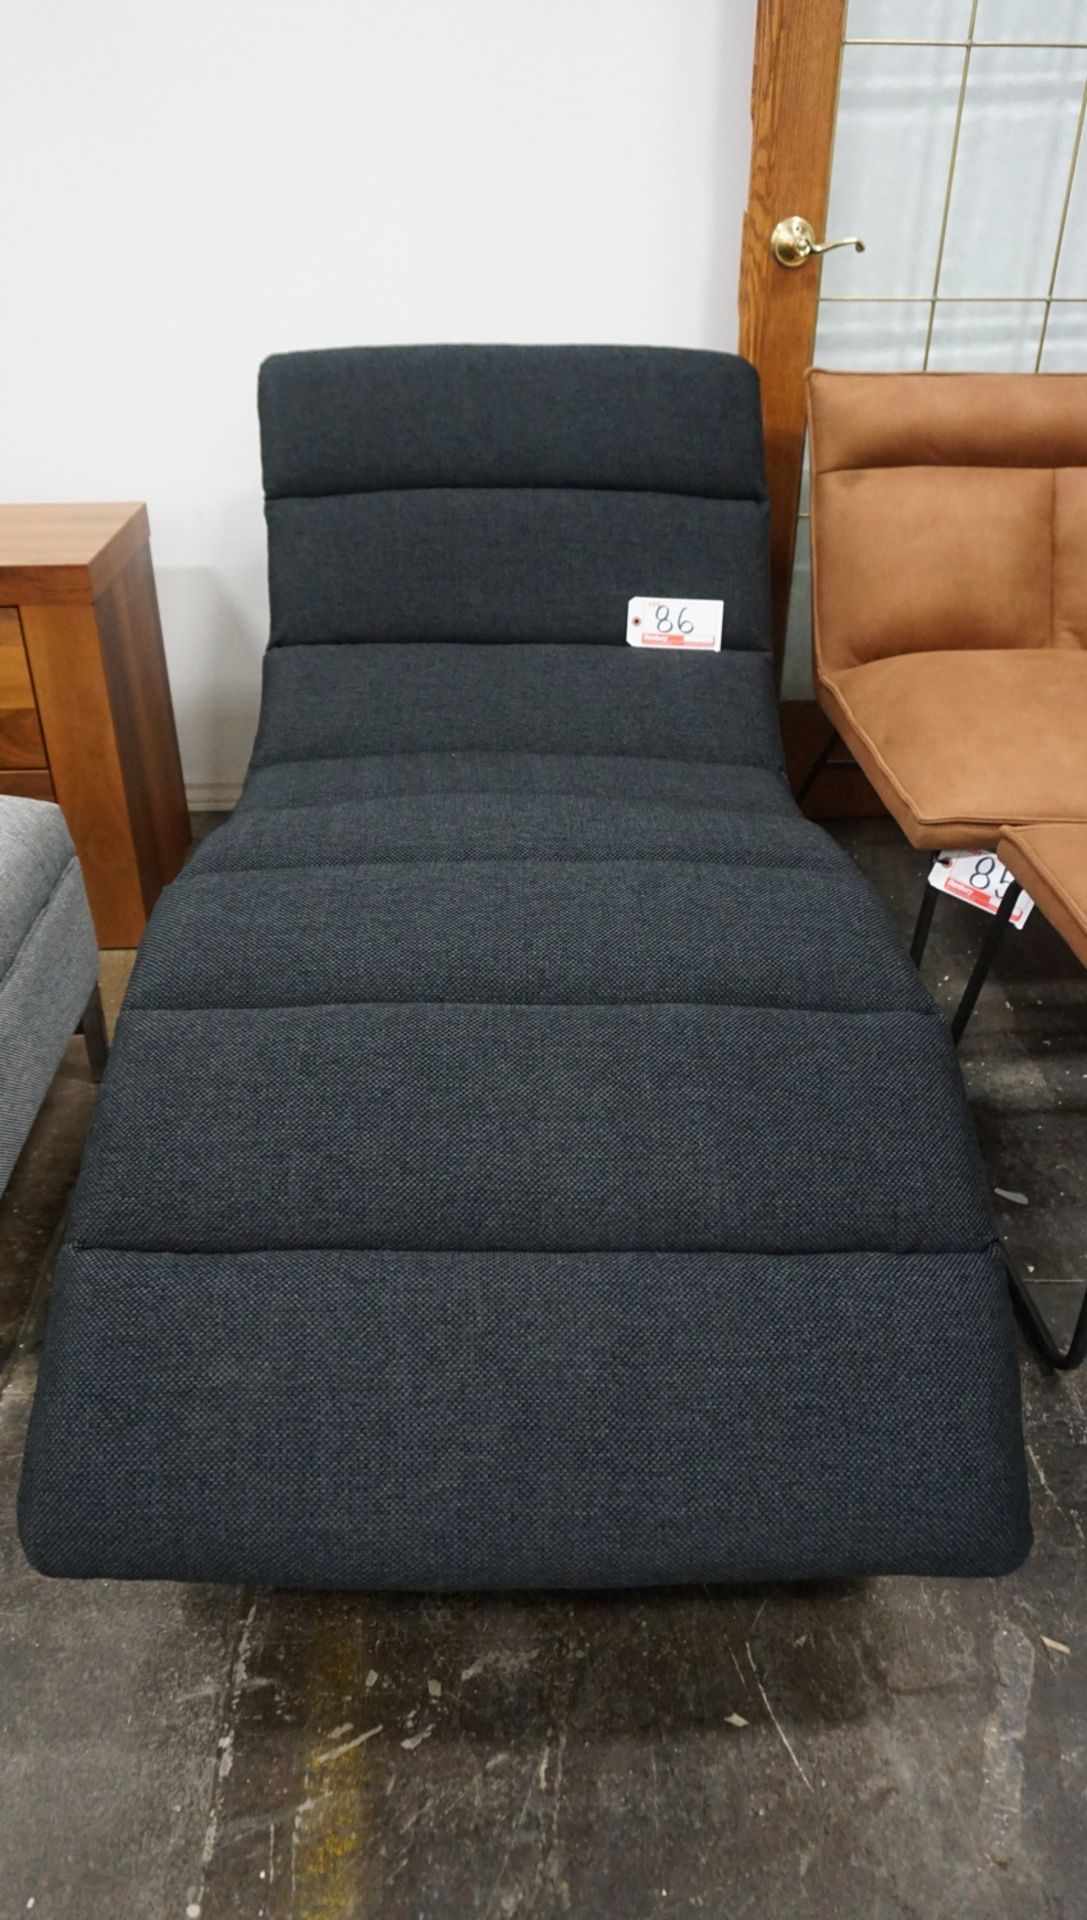 LOT - BLACK FABRIC UPHOLSTERED LOUNGE CHAIR - 64" X 29"